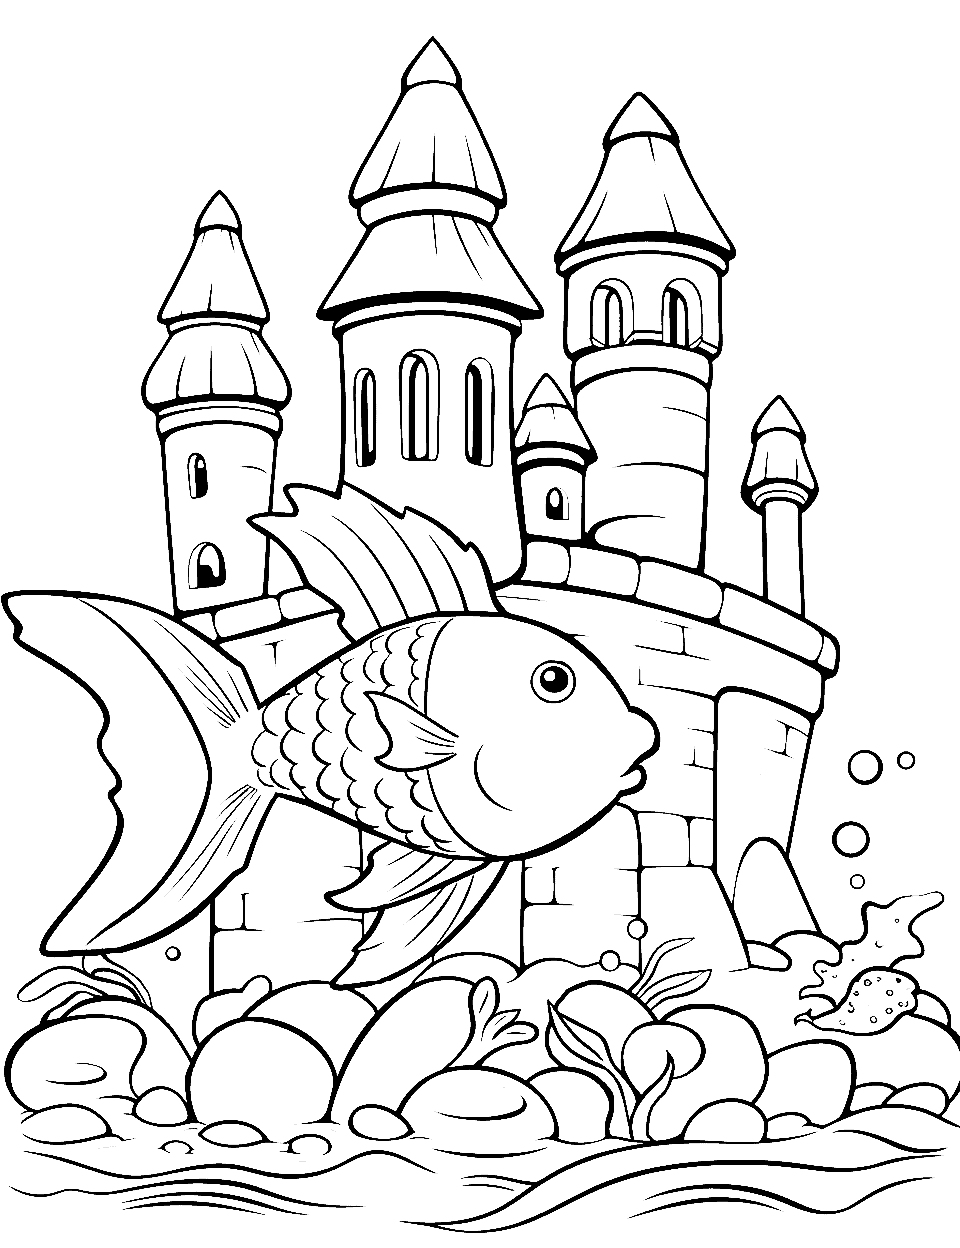 Fish and Sandcastles Coloring Page - Fish at the ocean floor with intricate sandcastles.